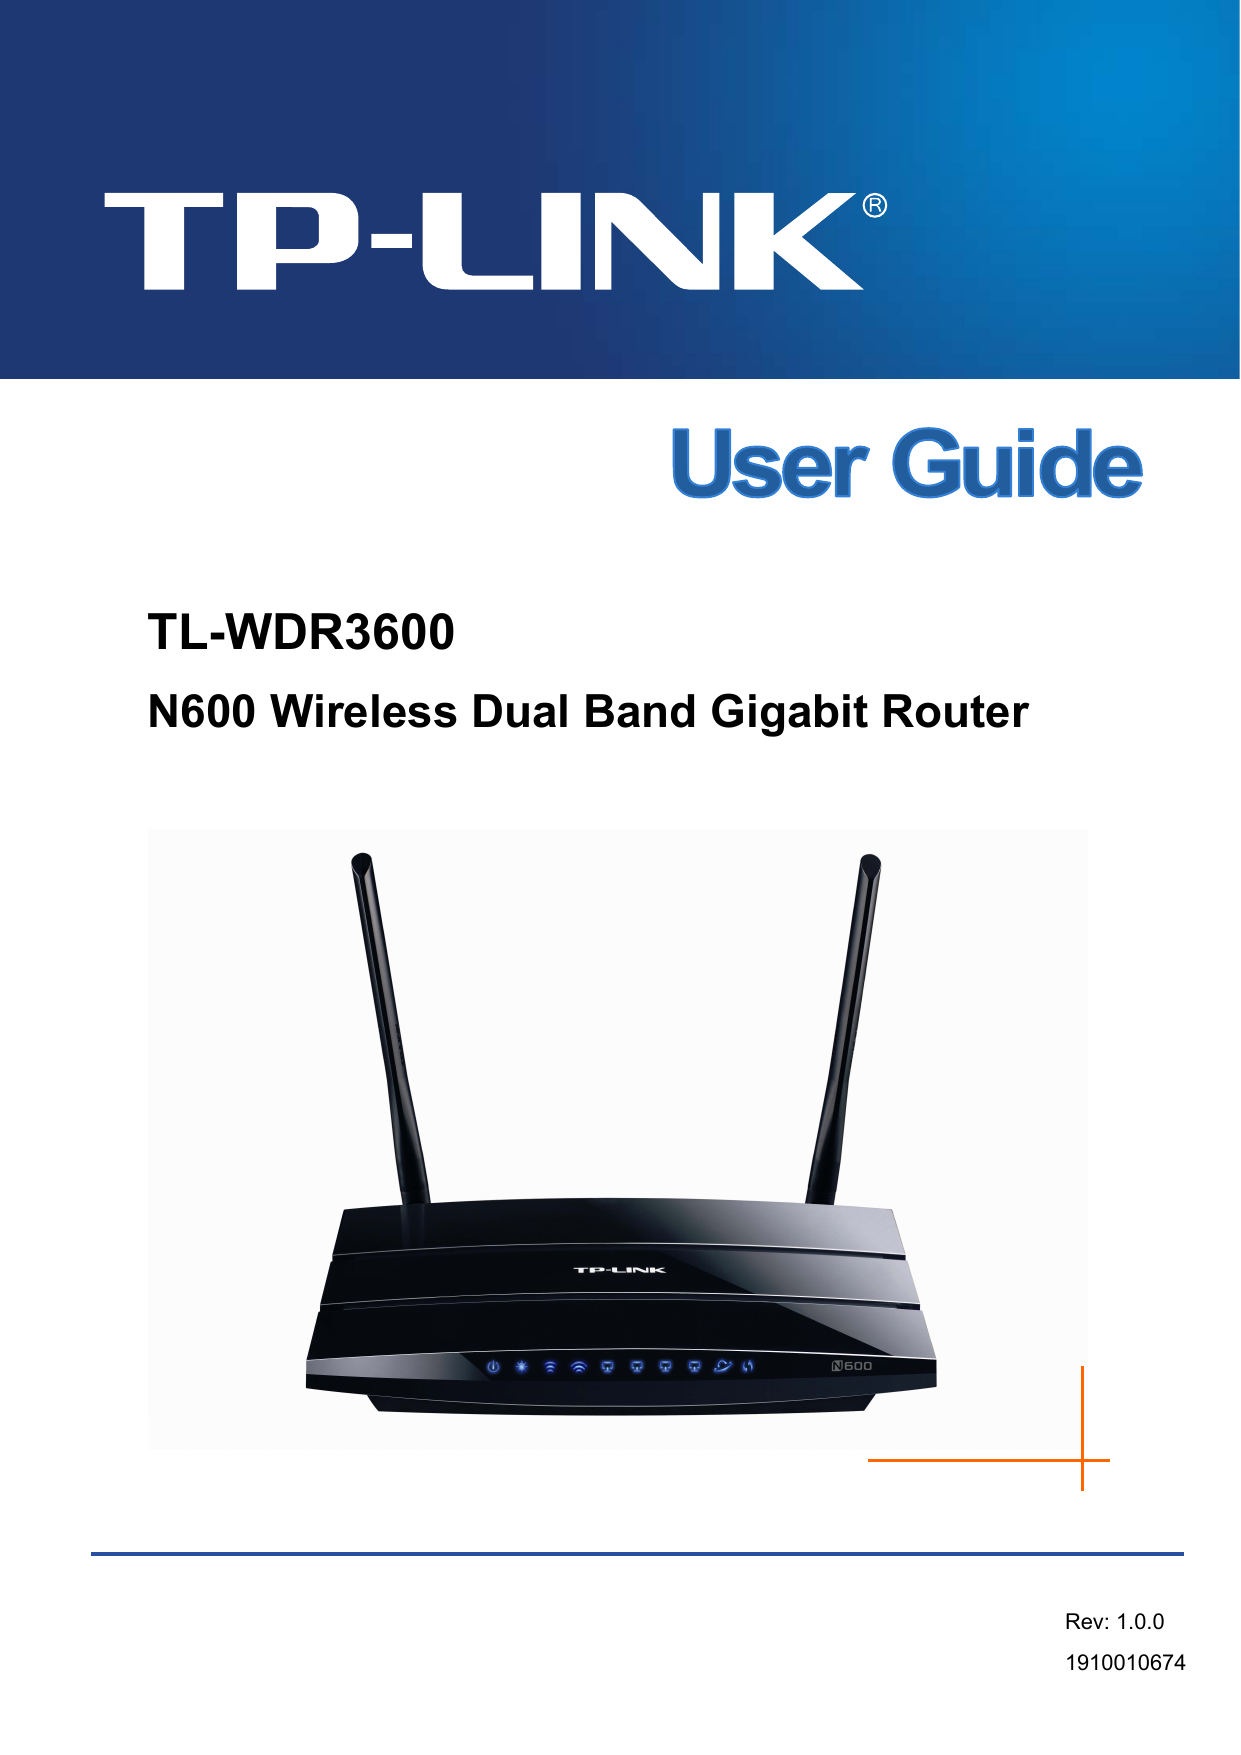    TL-WDR3600 N600 Wireless Dual Band Gigabit Router   Rev: 1.0.0 1910010674   